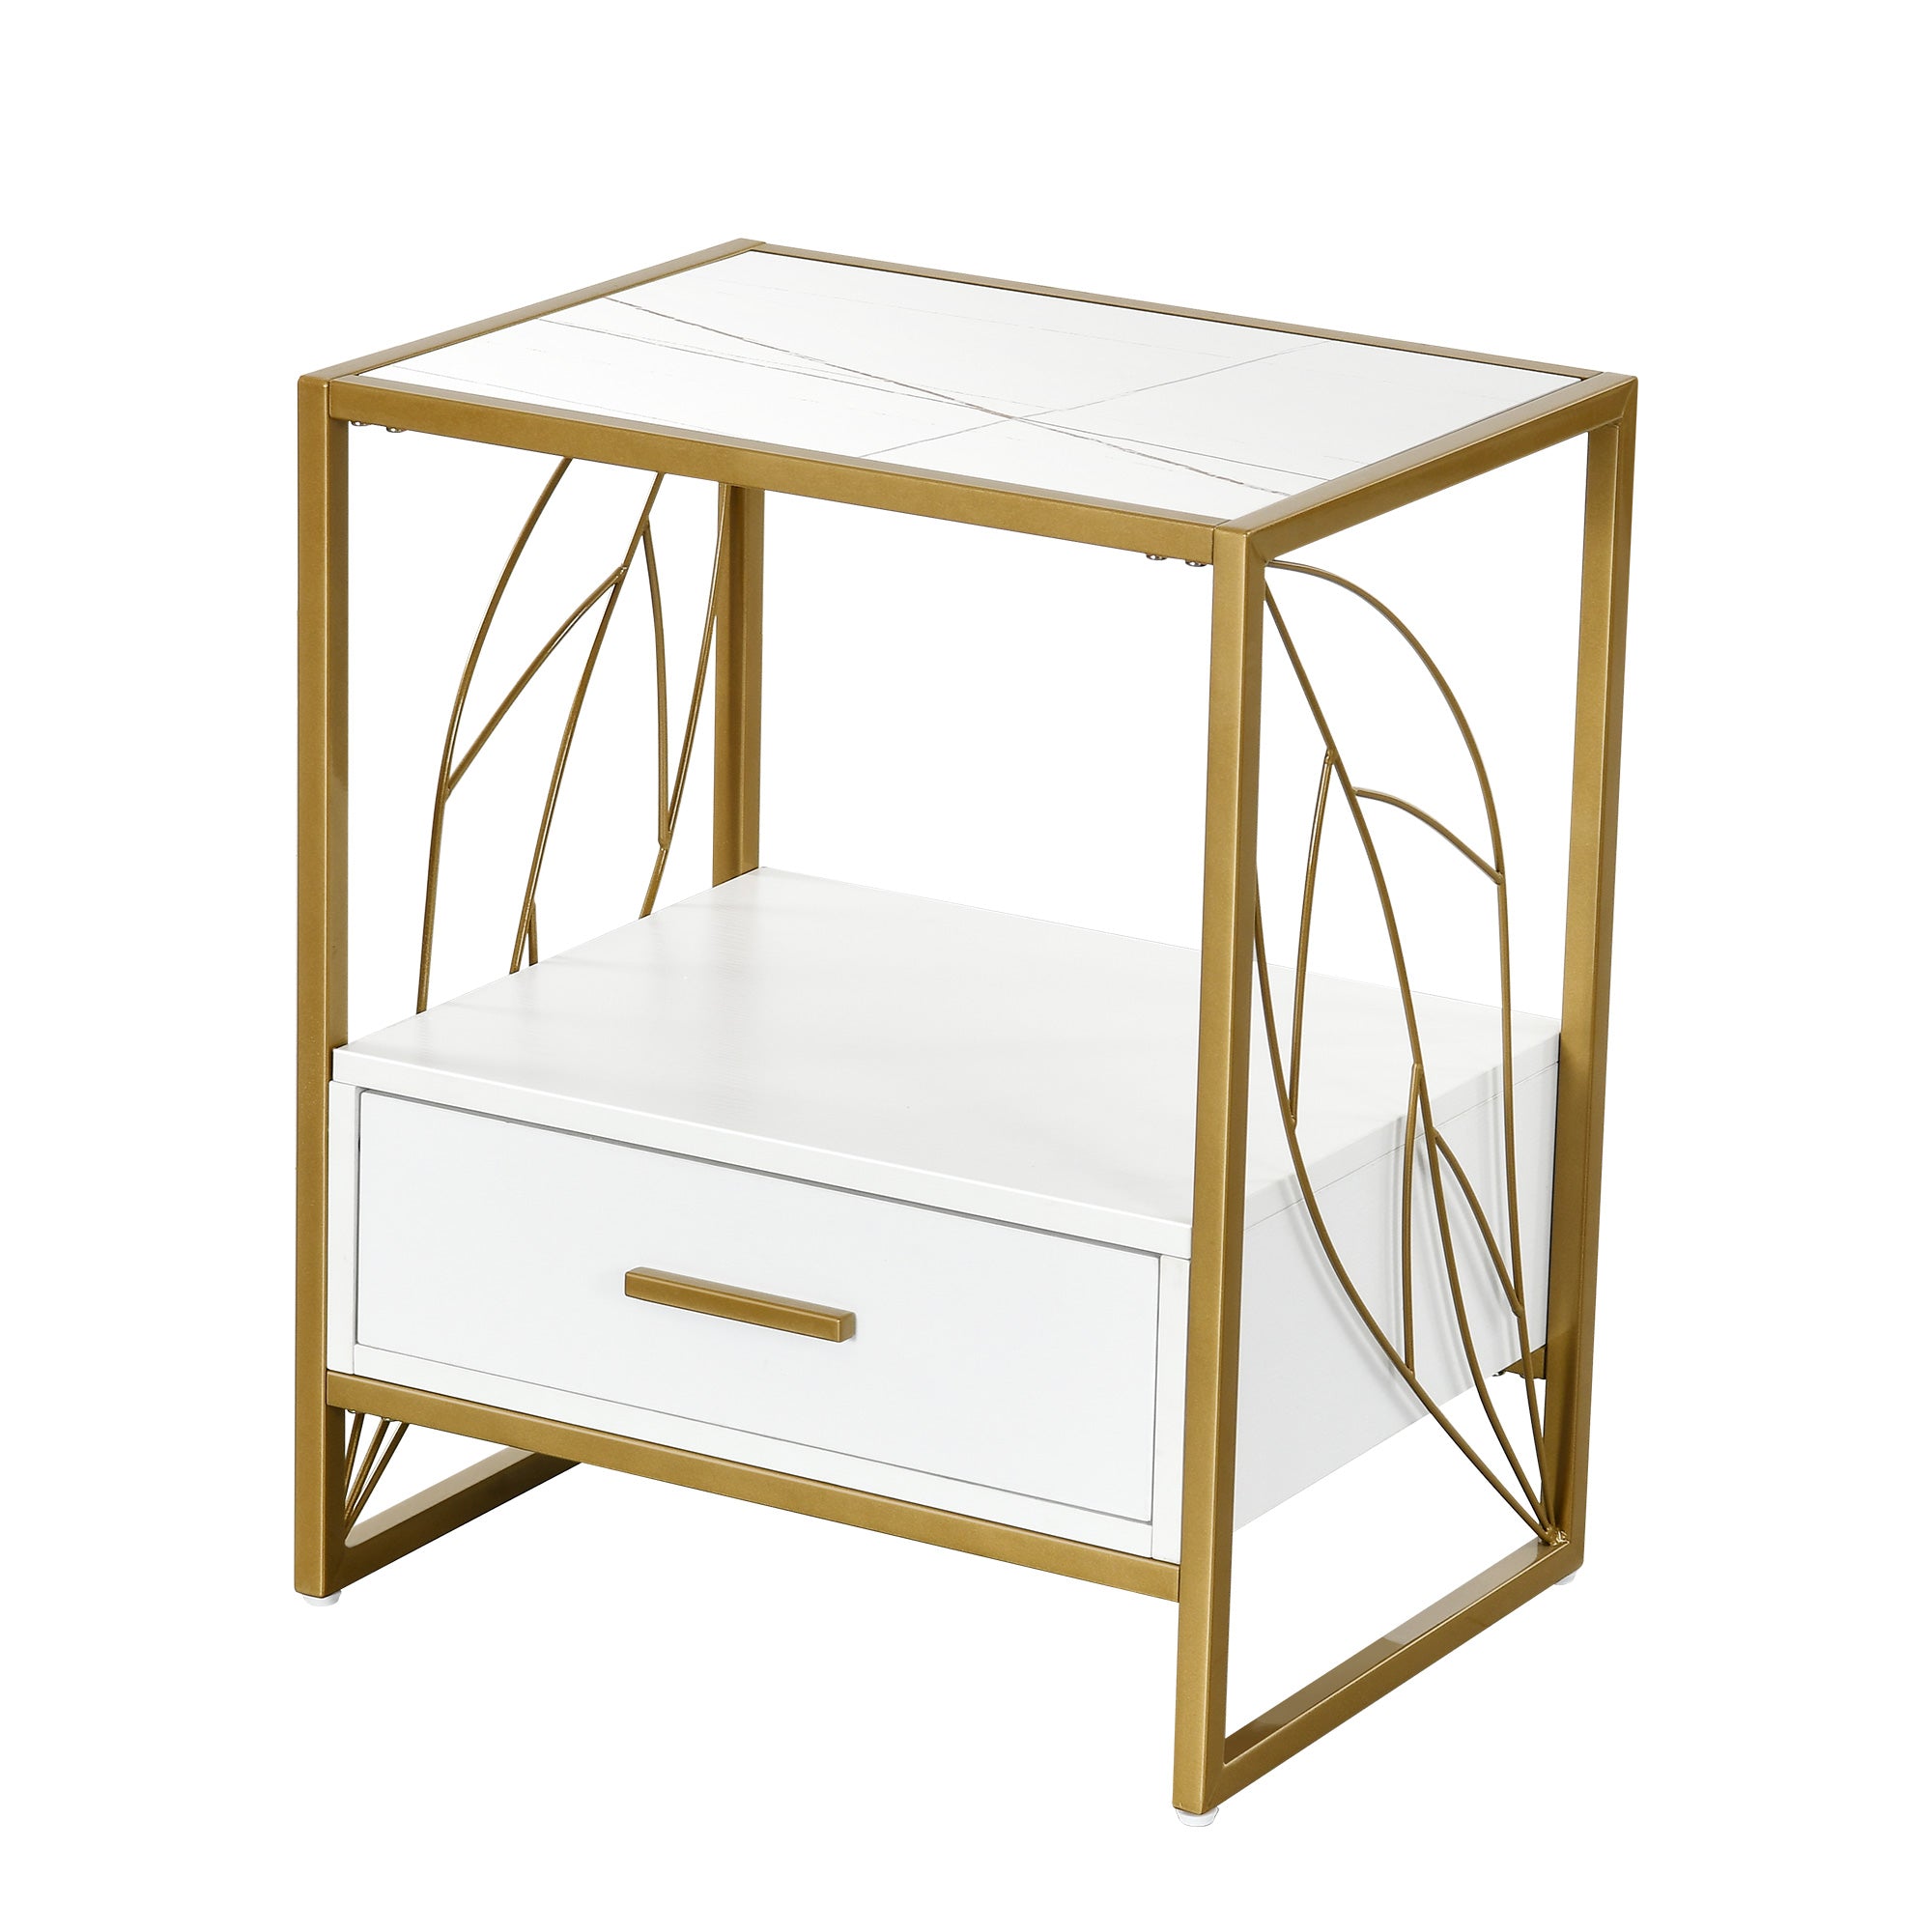 Odette 20" Modern Iron Wire Leaf Design with Drawers Side Table, White & Black